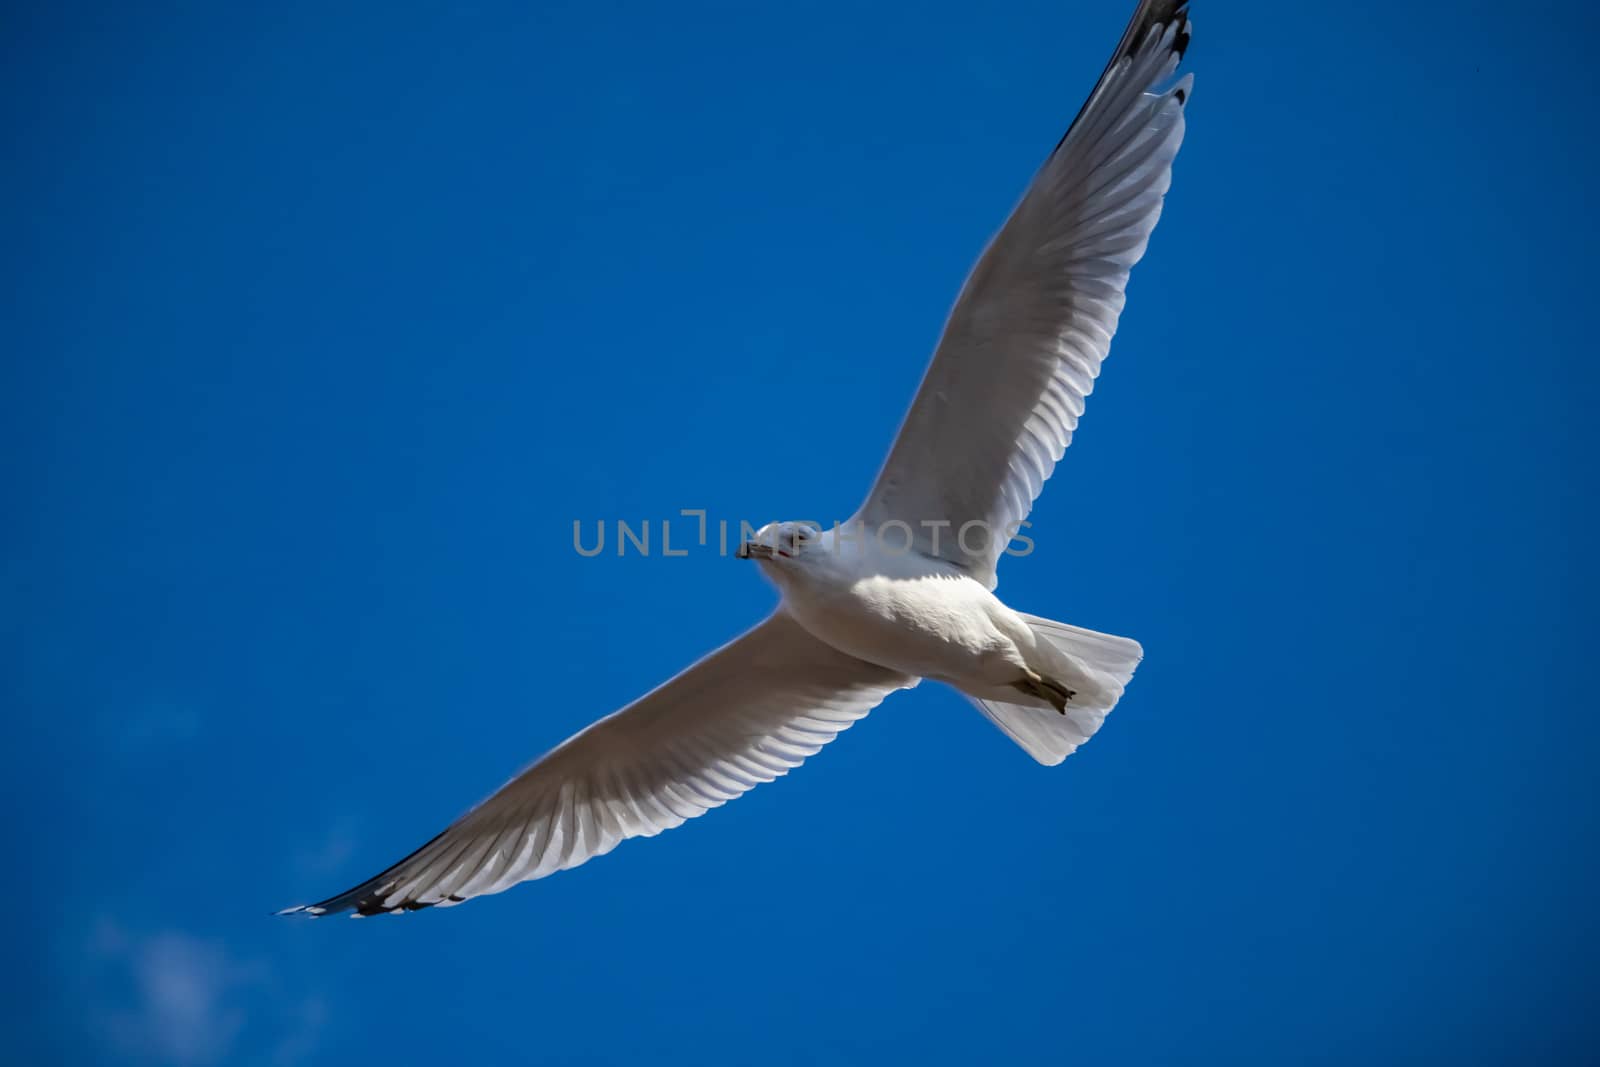 Seagull with outstretched wings seen in a blue sky by colintemple